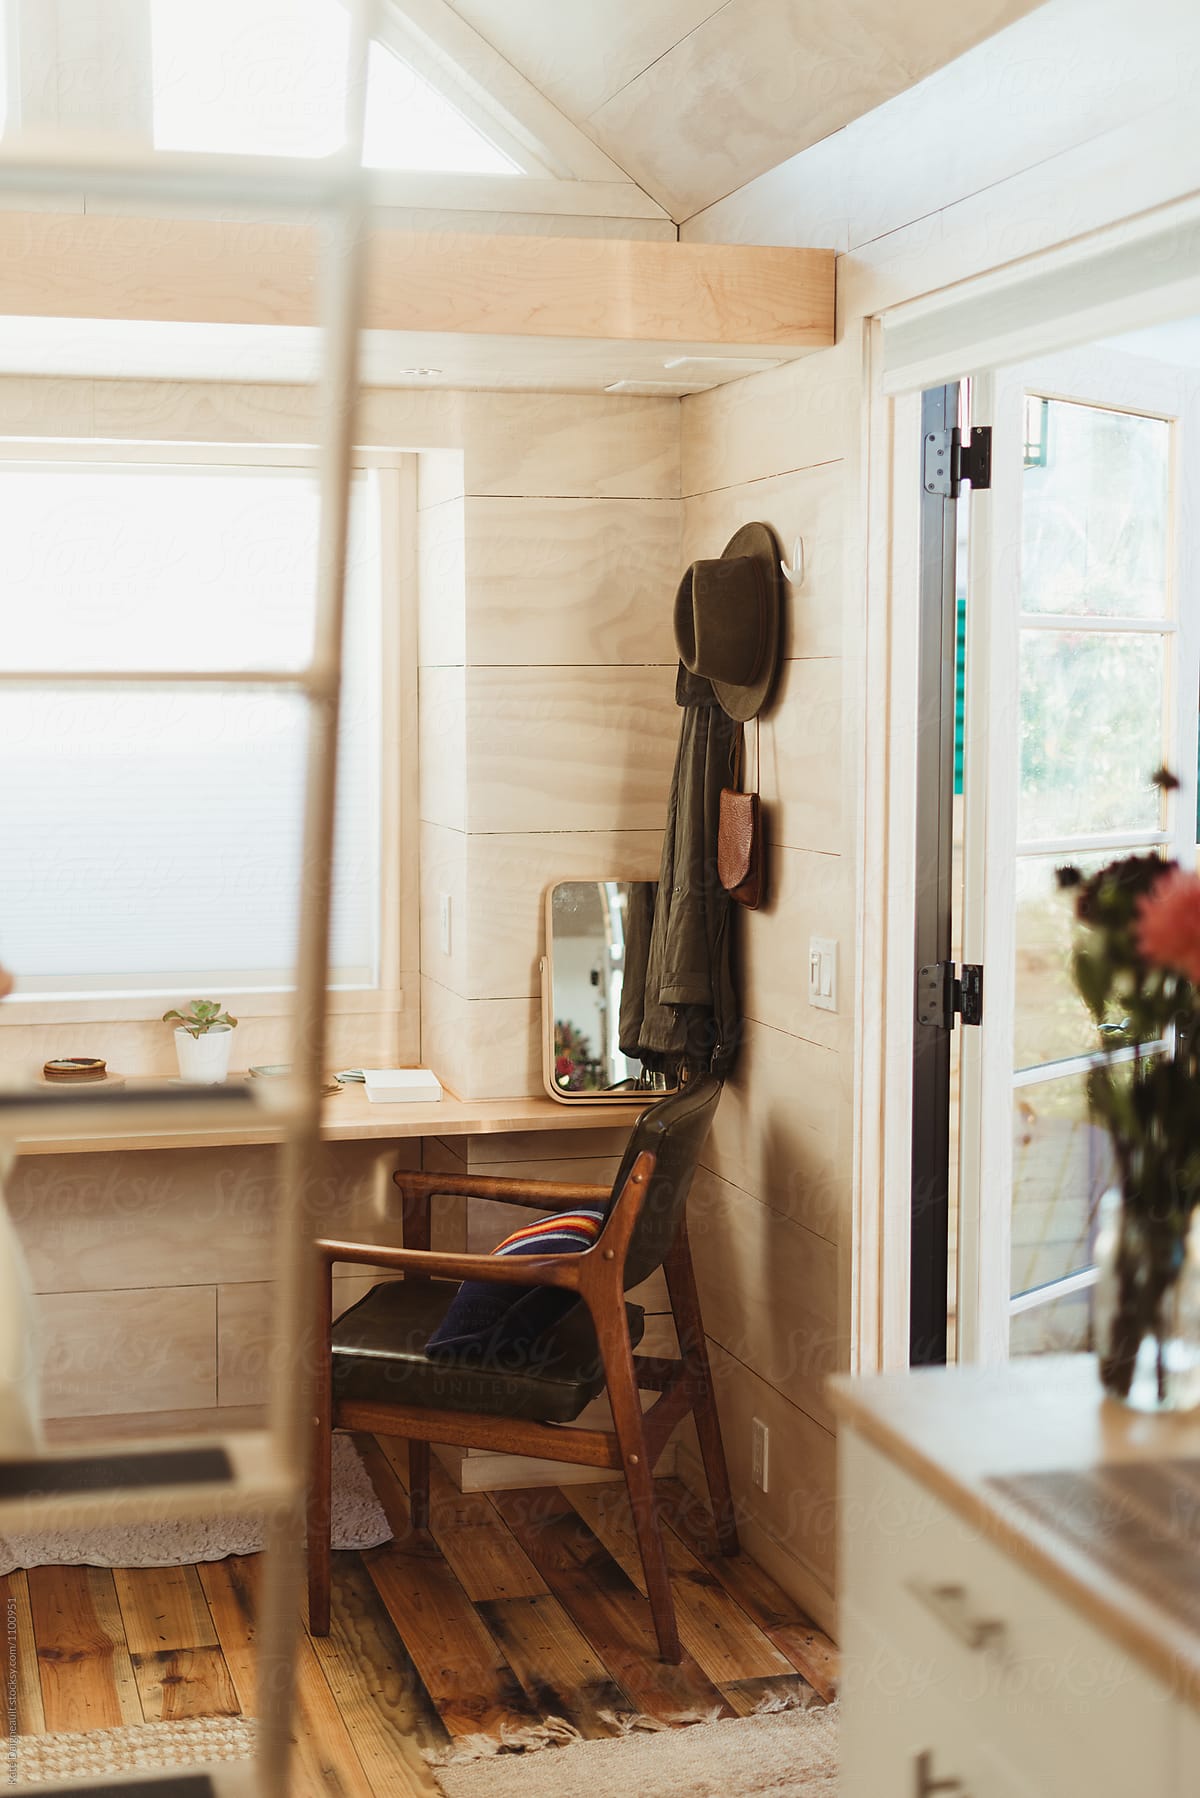 Interior of a well decorated tiny home.